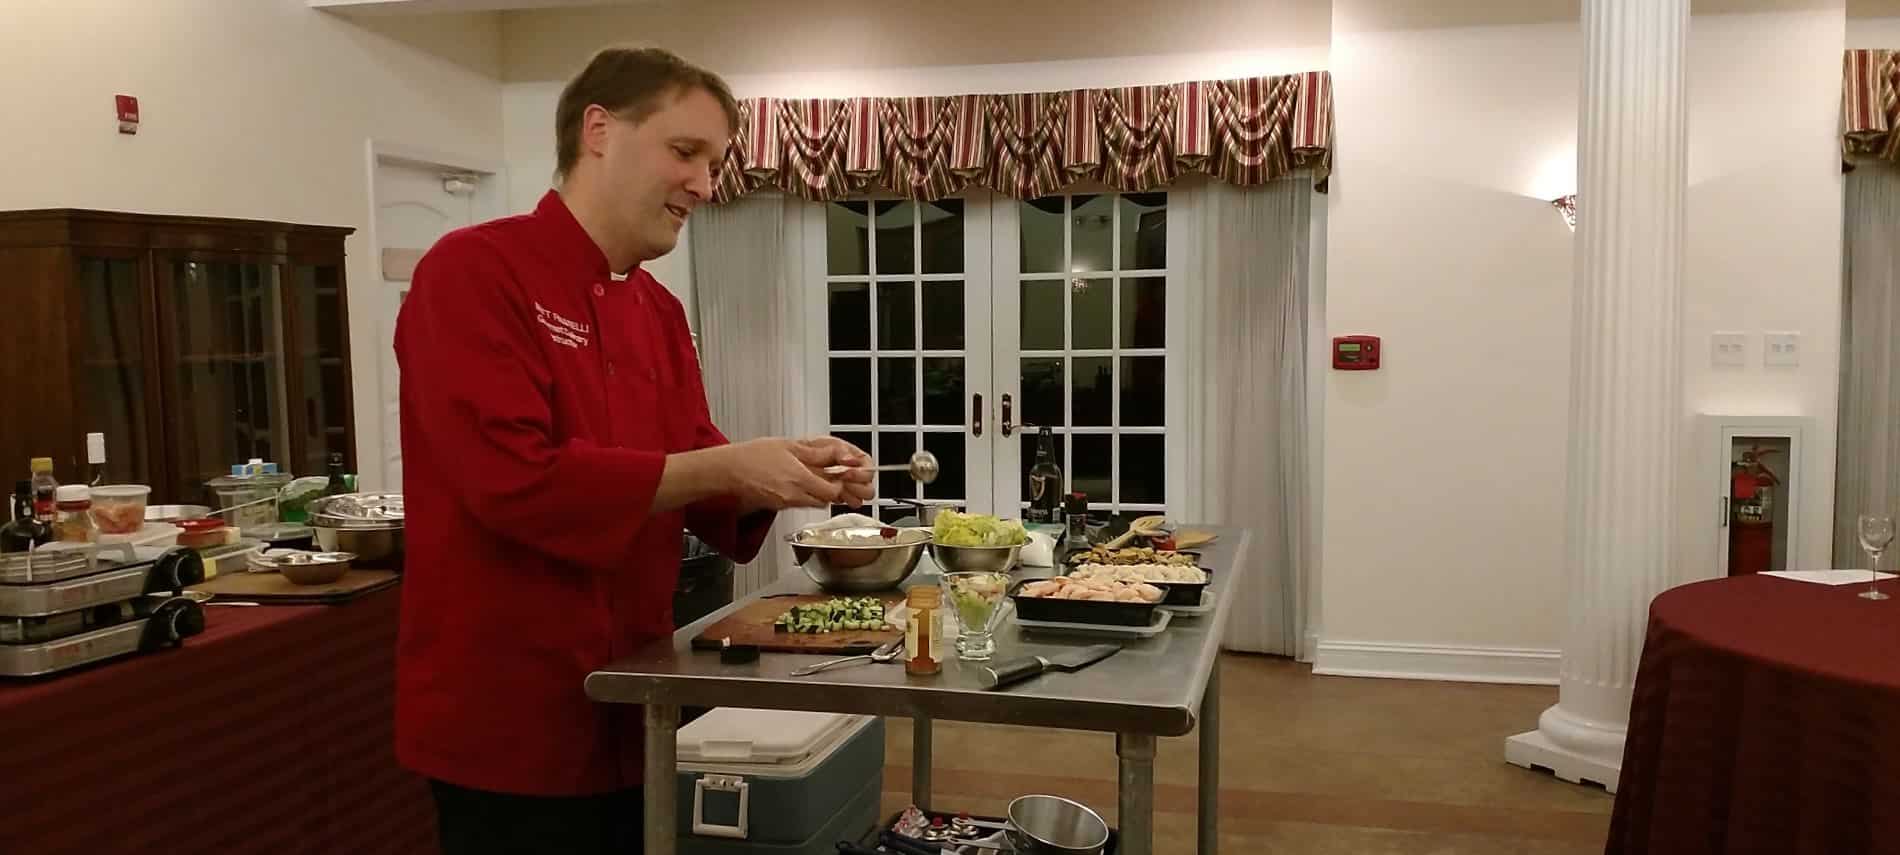 Chef in red shirt giving presentation on how to prepare a meal